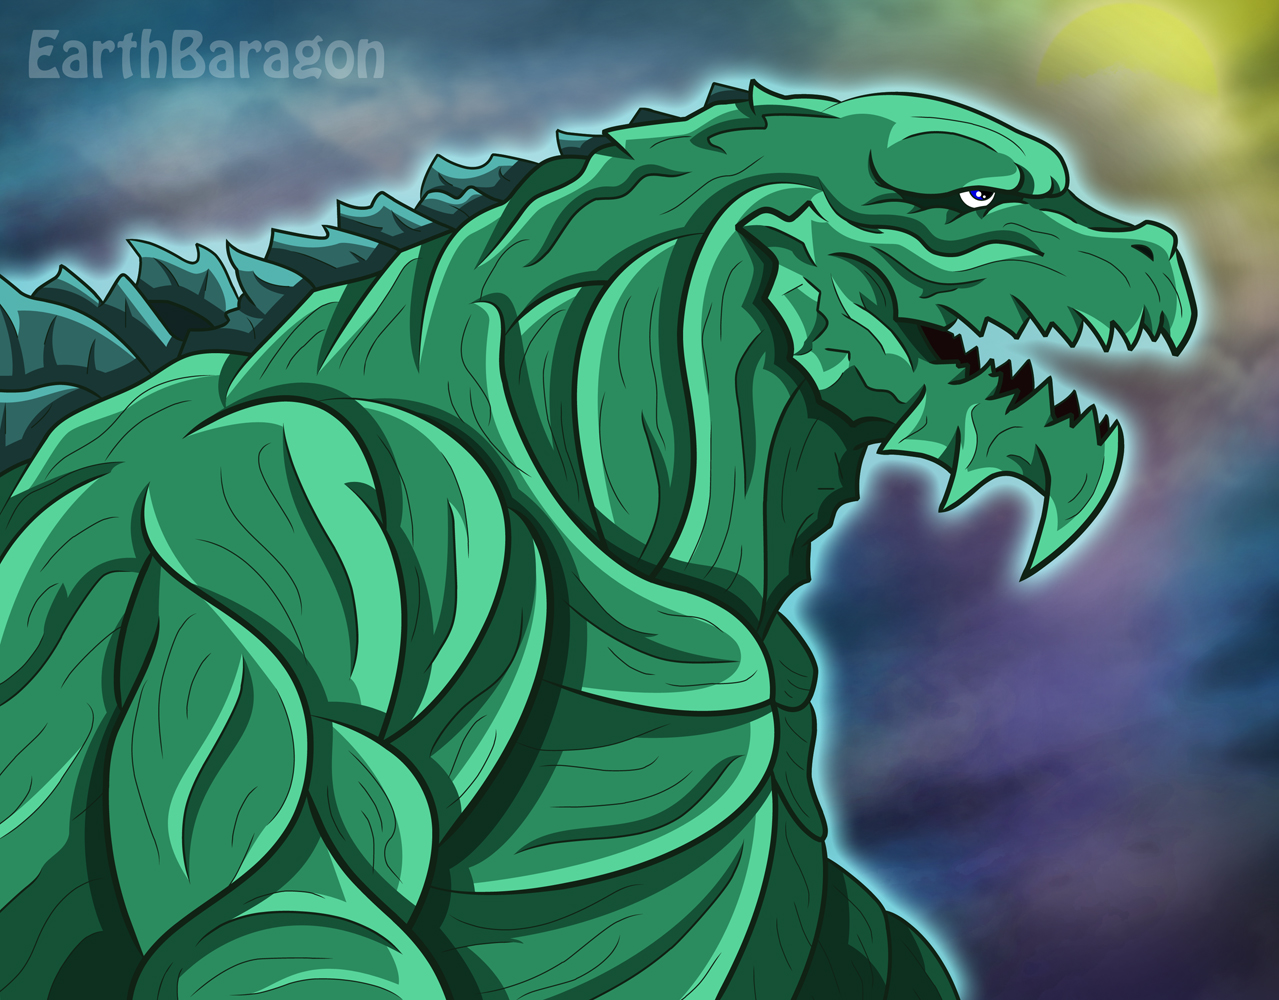 Godzilla Earth from Monster Planet - malmal: draw online with friends